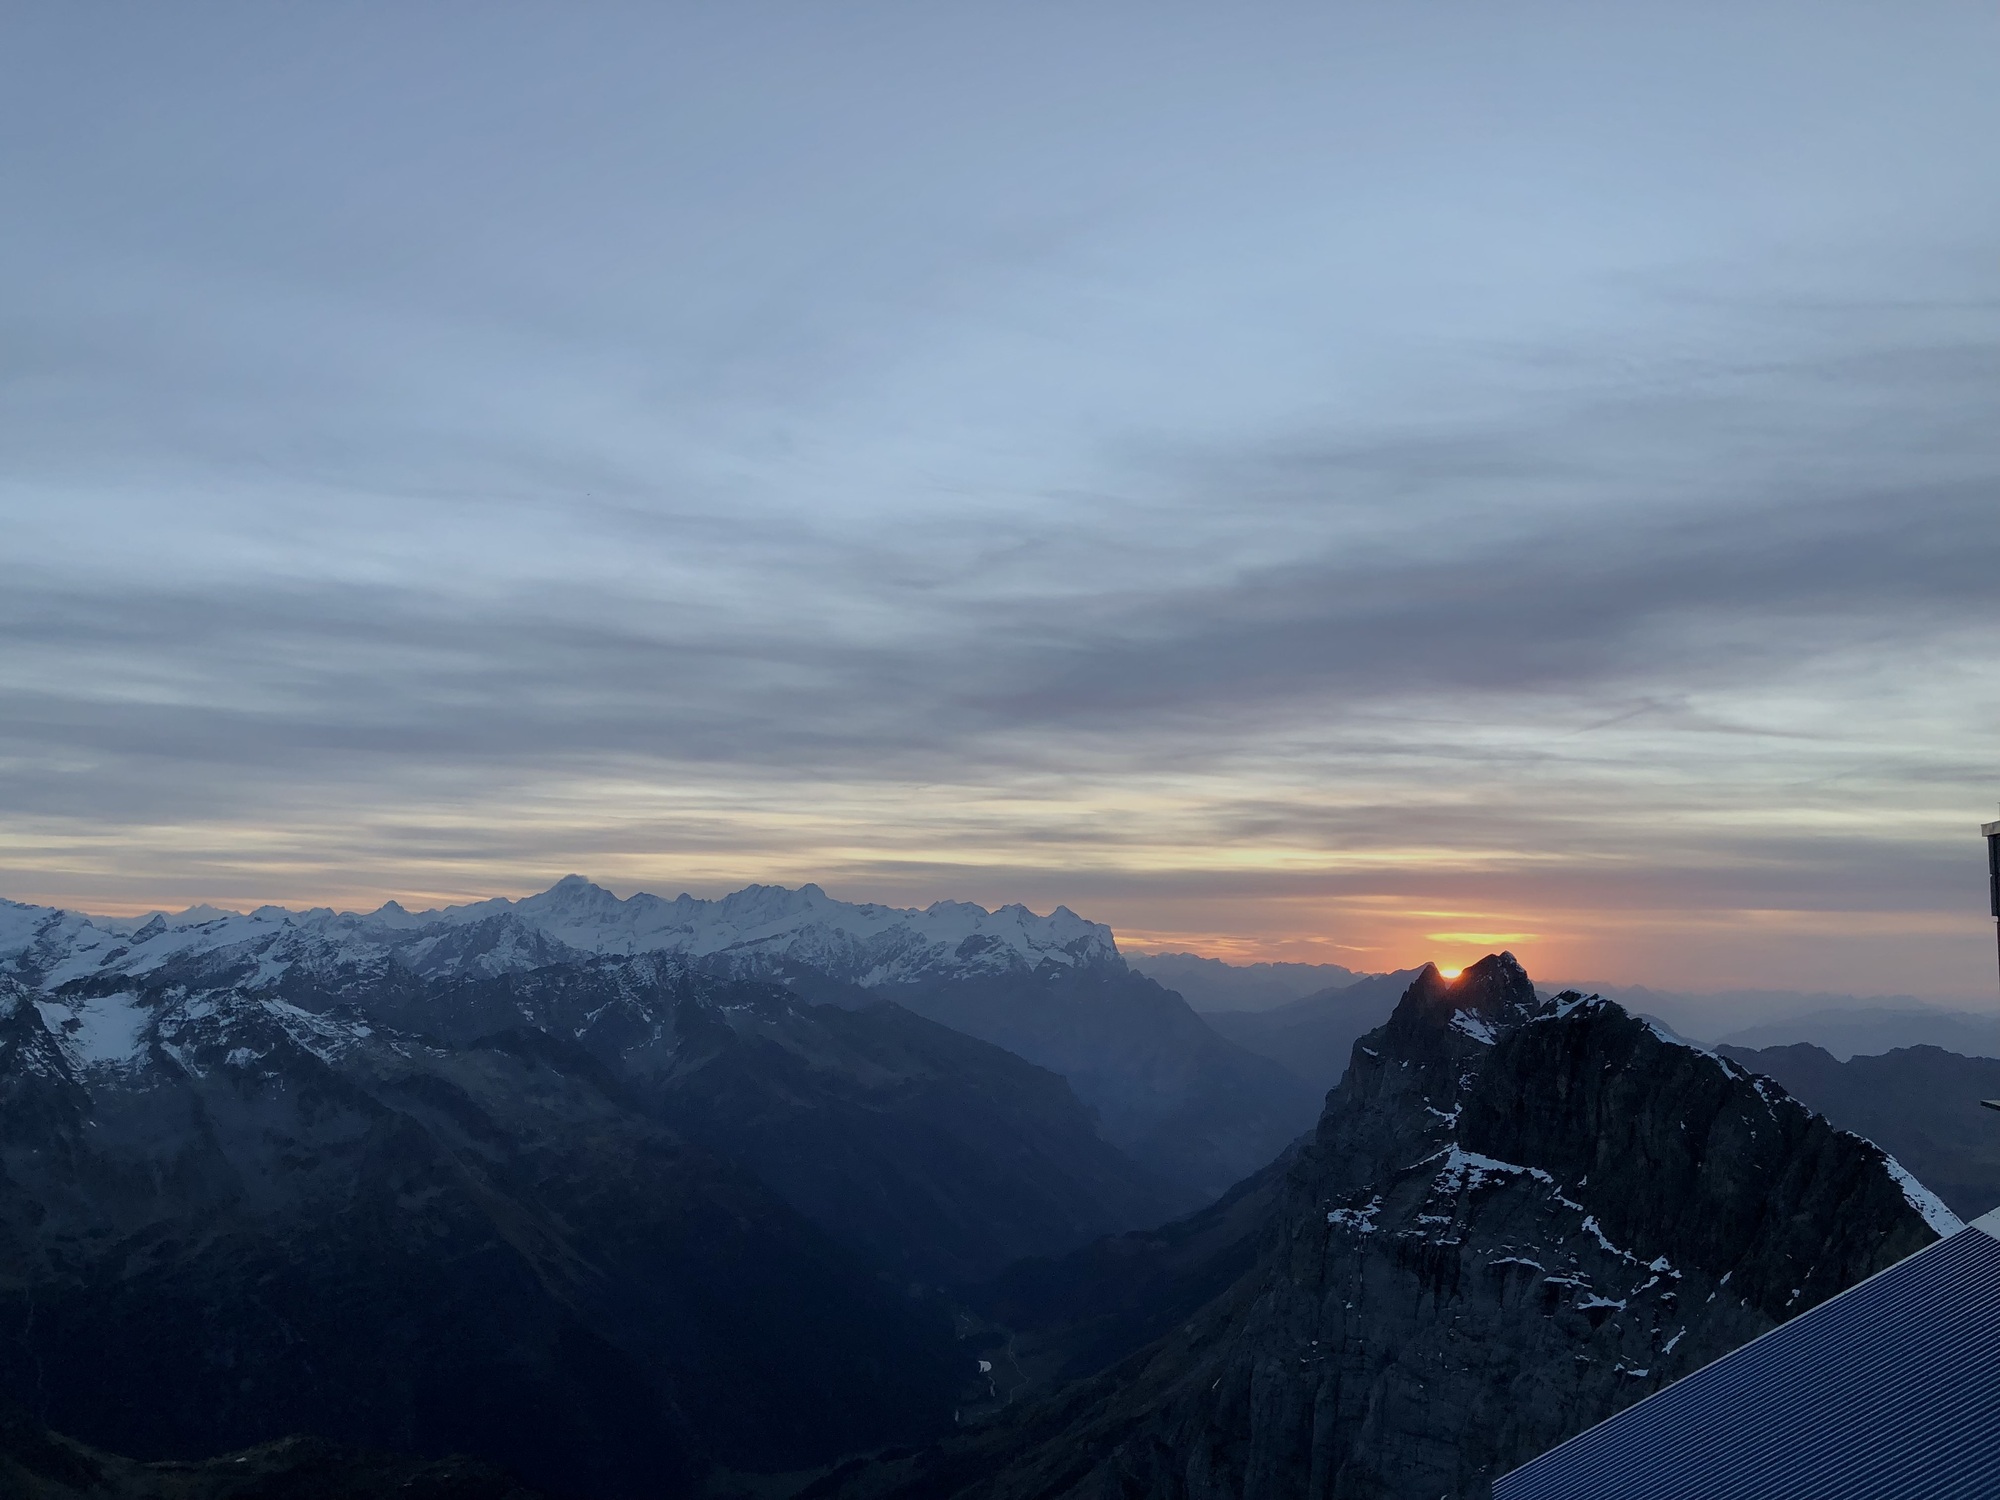 Sunset on the Titlis